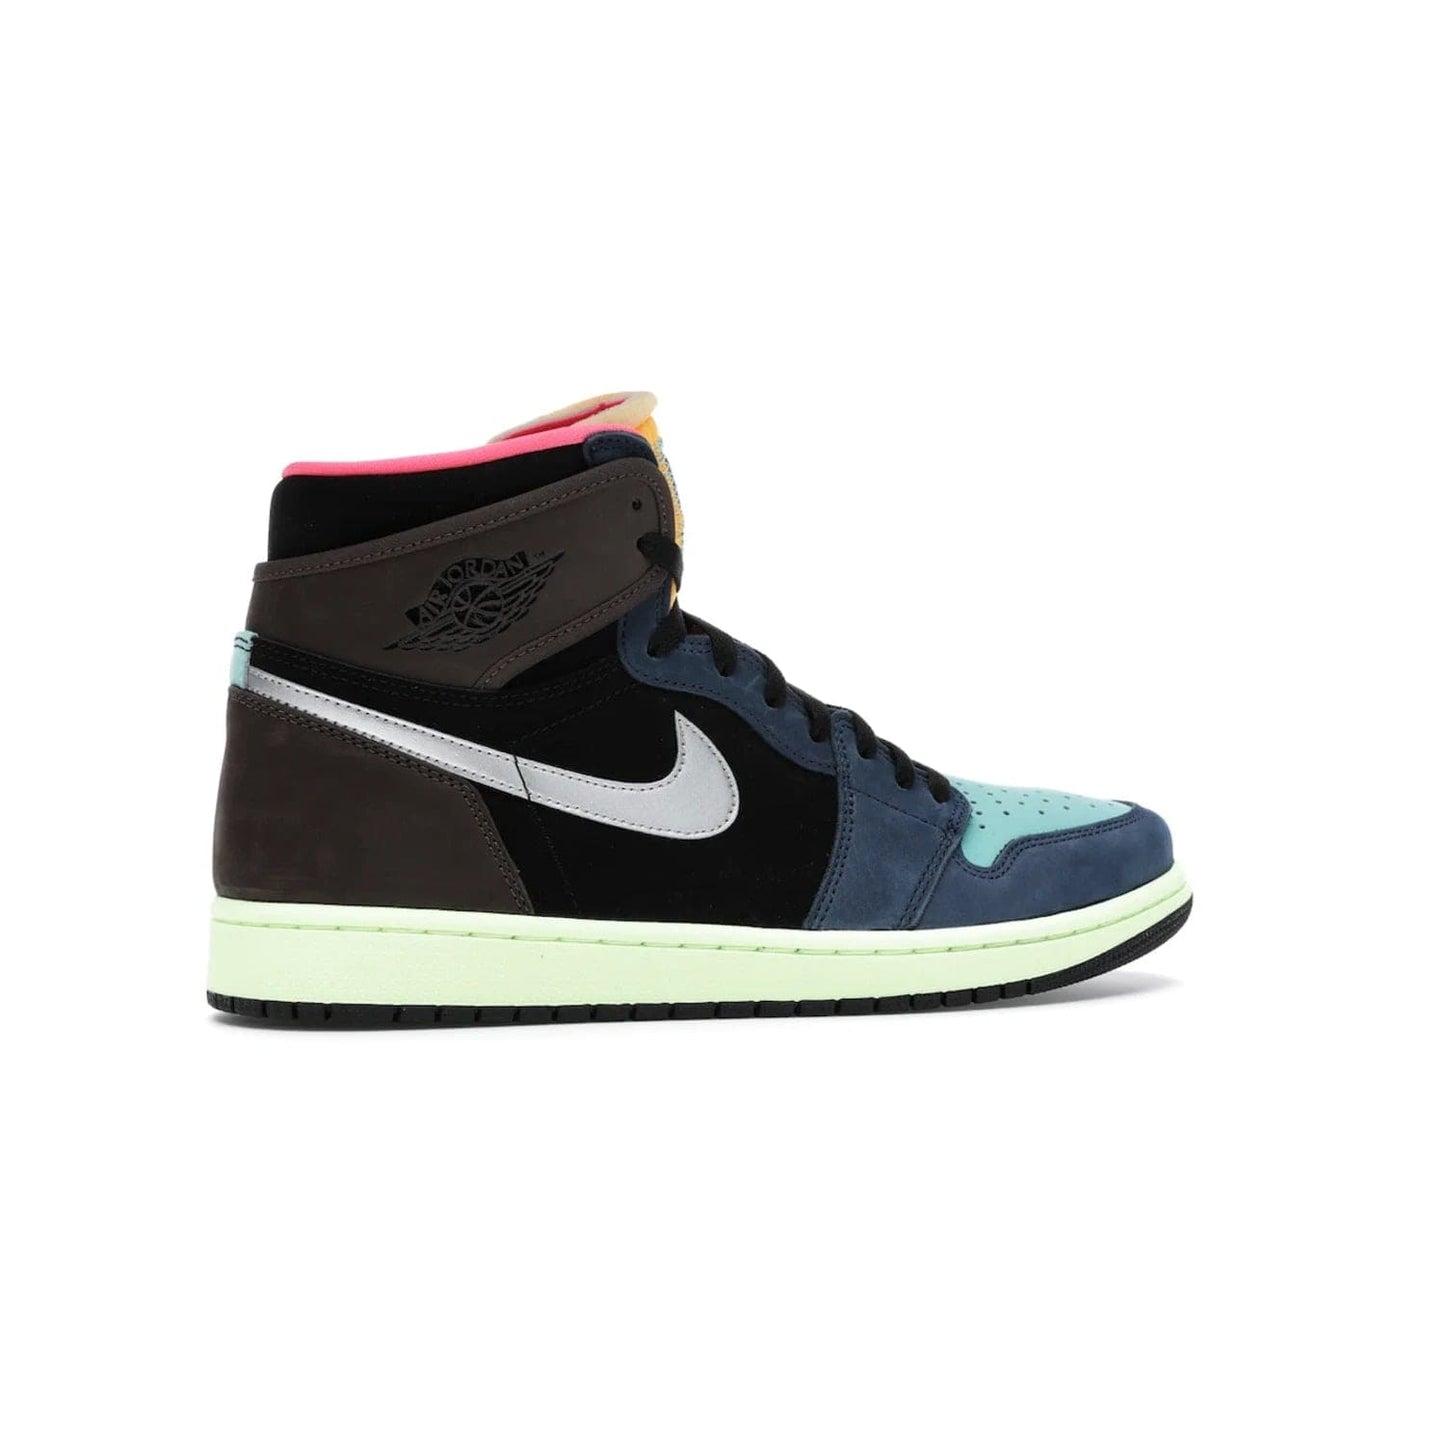 Jordan 1 Retro High Tokyo Bio Hack - Image 35 - Only at www.BallersClubKickz.com - Step up your sneaker game with the Air Jordan 1 Retro High Tokyo Bio Hack! Unique design featuring multiple materials and eye-catching colors. Metallic leather Swoosh and light green midsole for a stunning look. Available now for just $170.